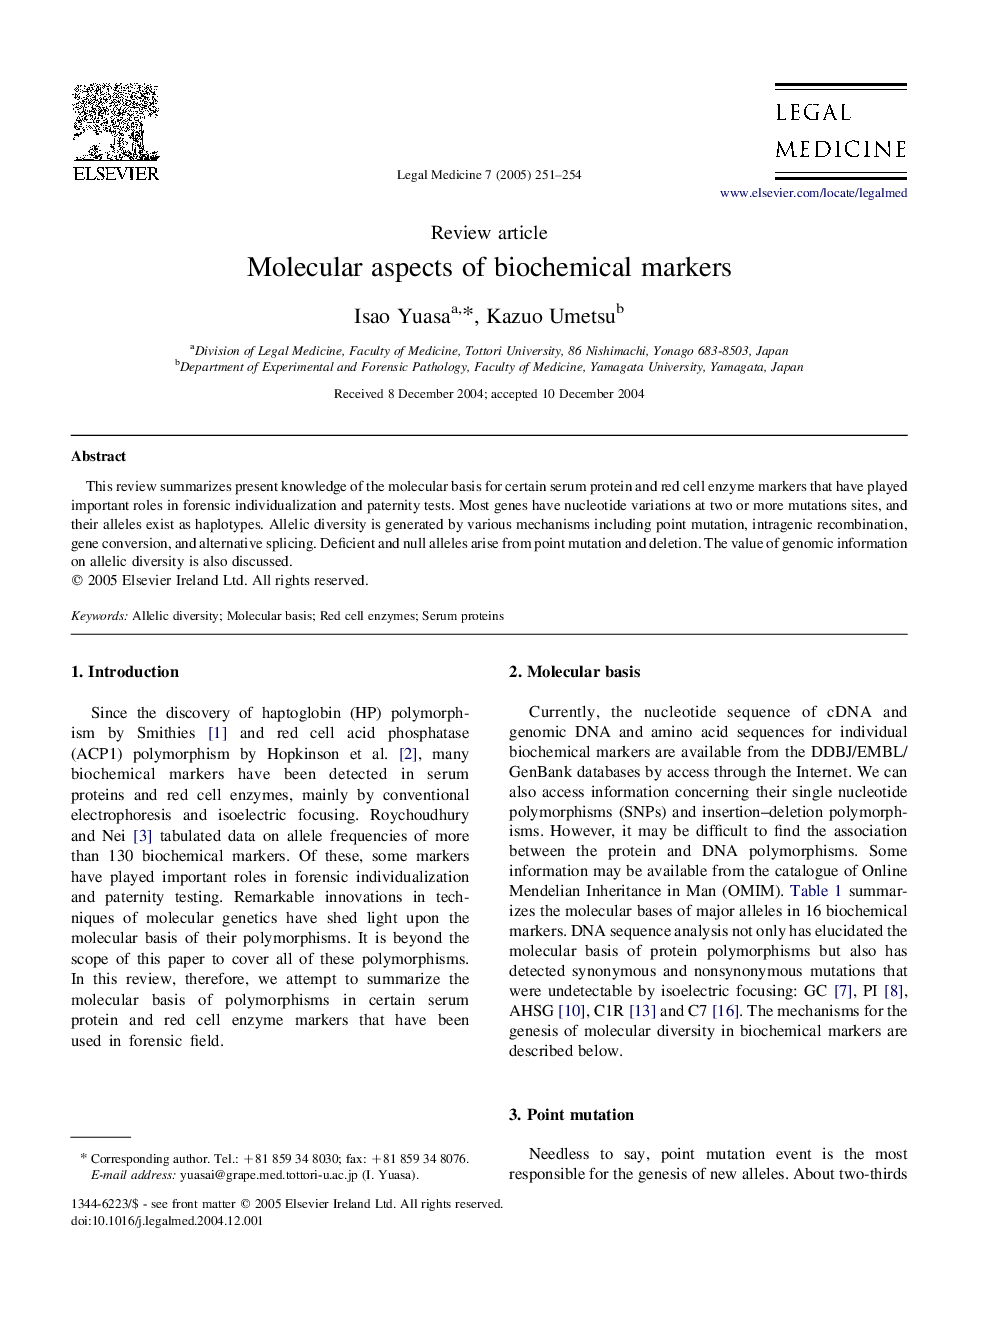 Molecular aspects of biochemical markers